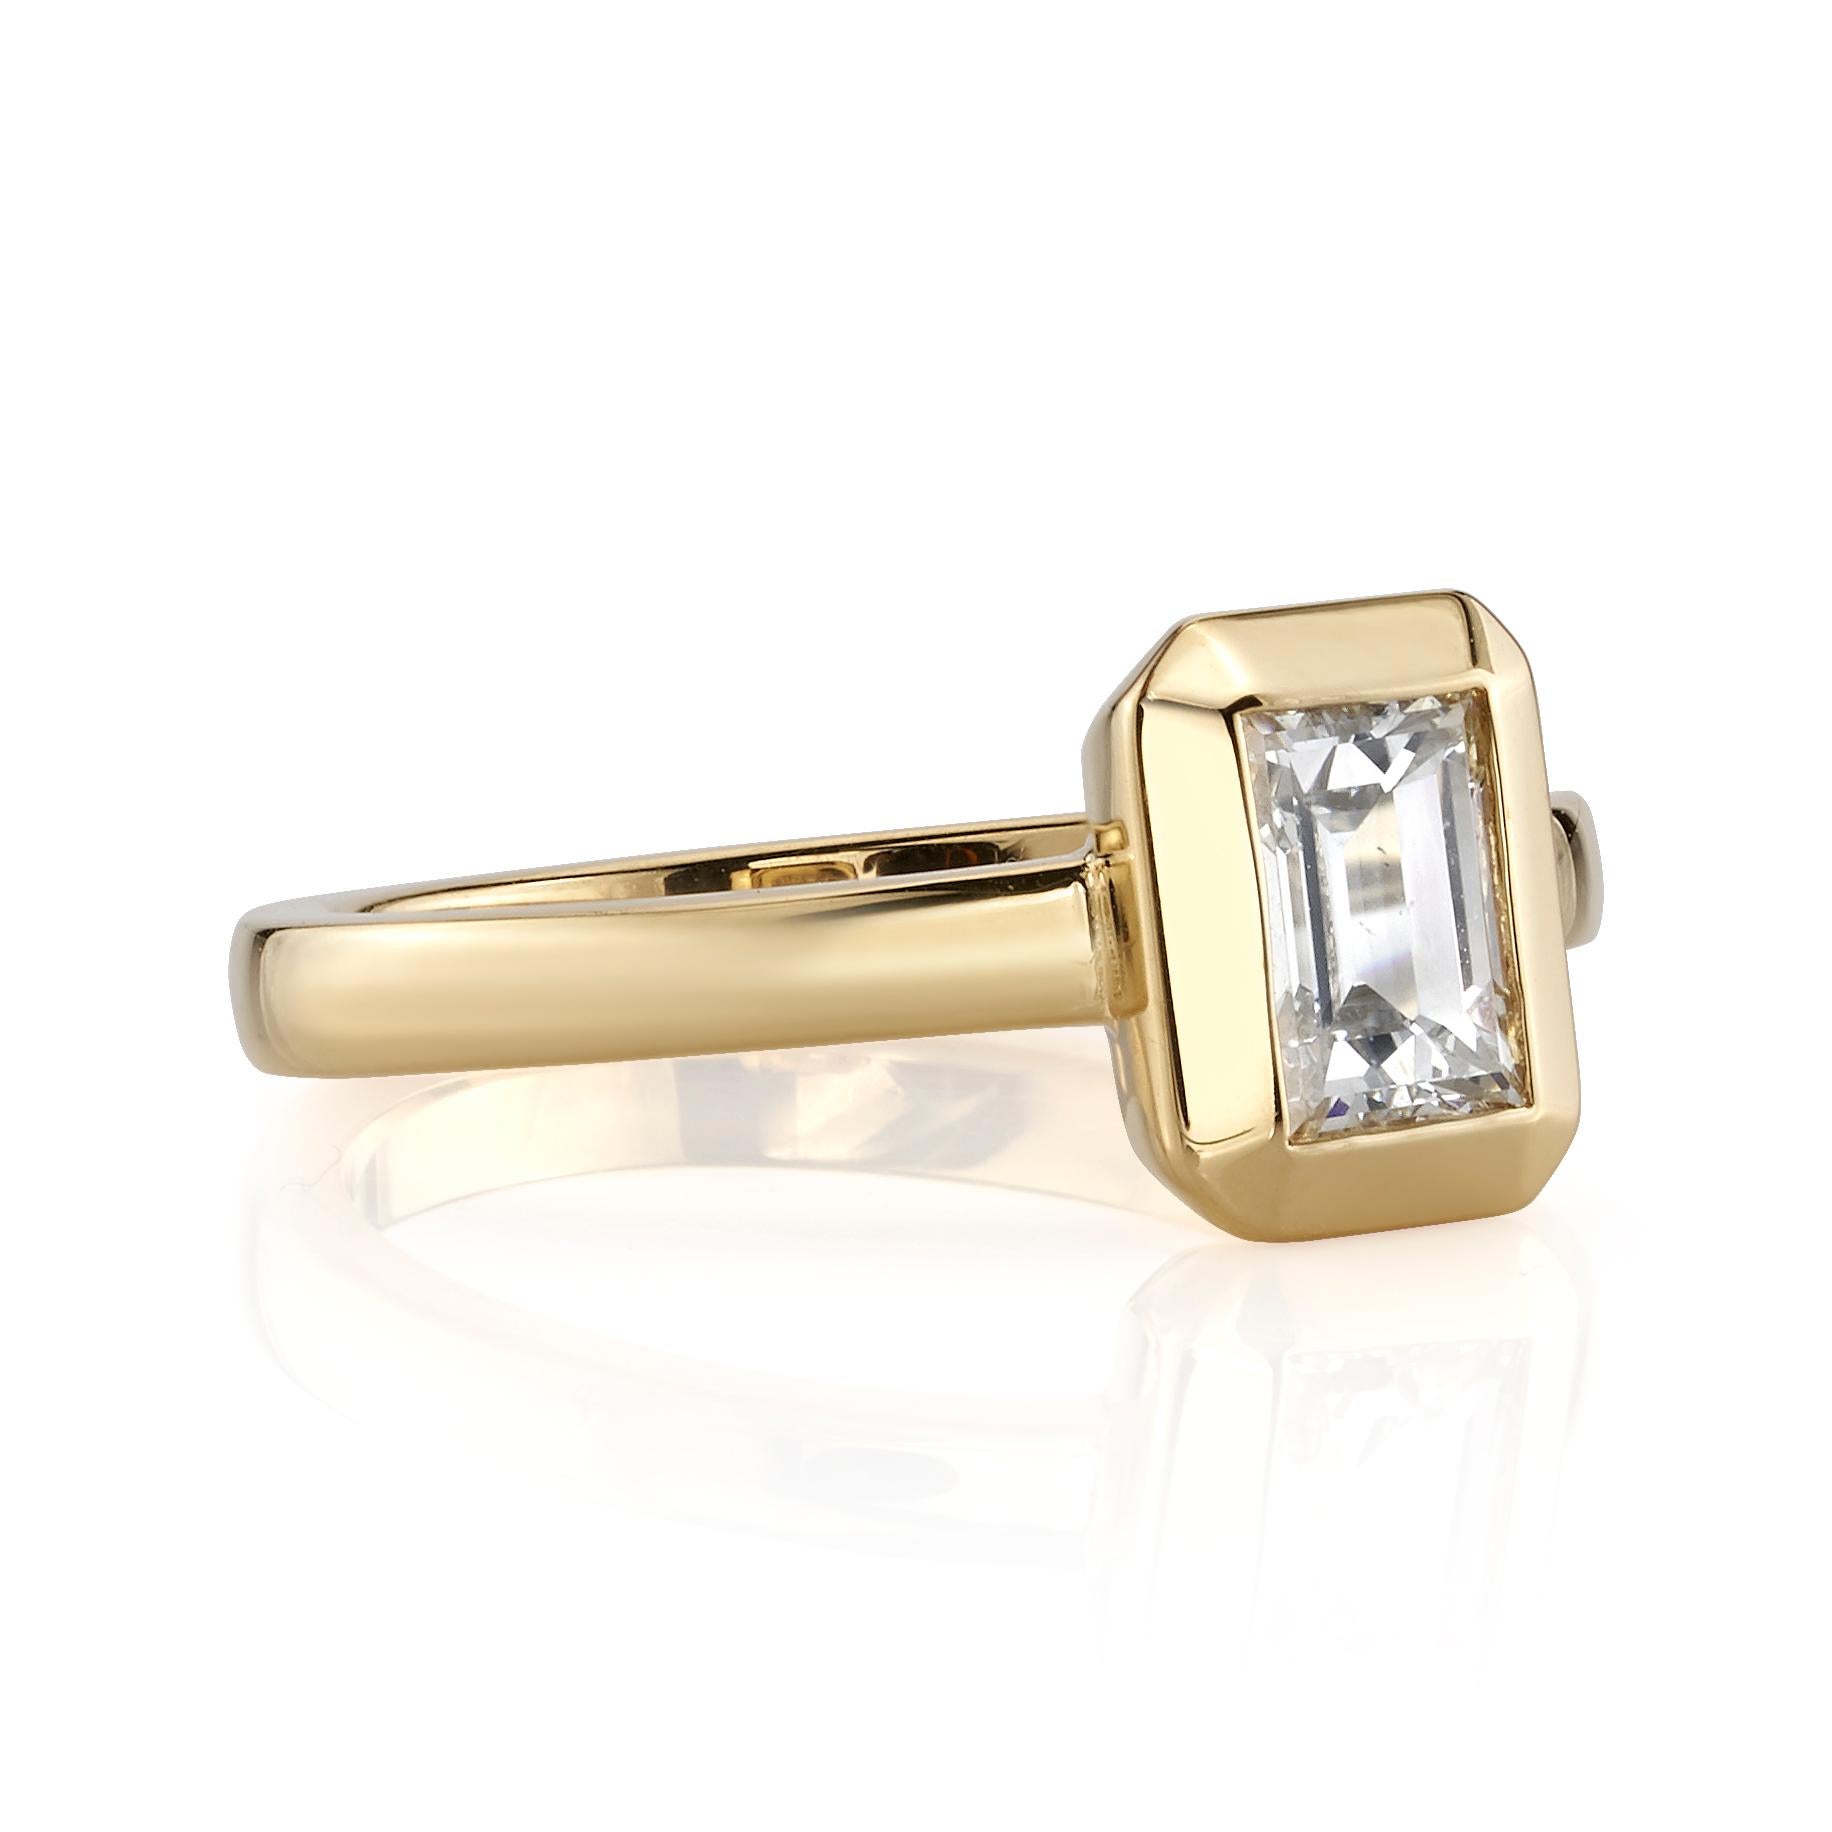 0.74ctw G/VS2 GIA certified rectangular Step cut diamond set in a handcrafted 18K yellow gold mounting. 

Ring is currently a size 6 and can be sized to fit.

Our jewelry is made locally in Los Angeles and most pieces are made to order. For these